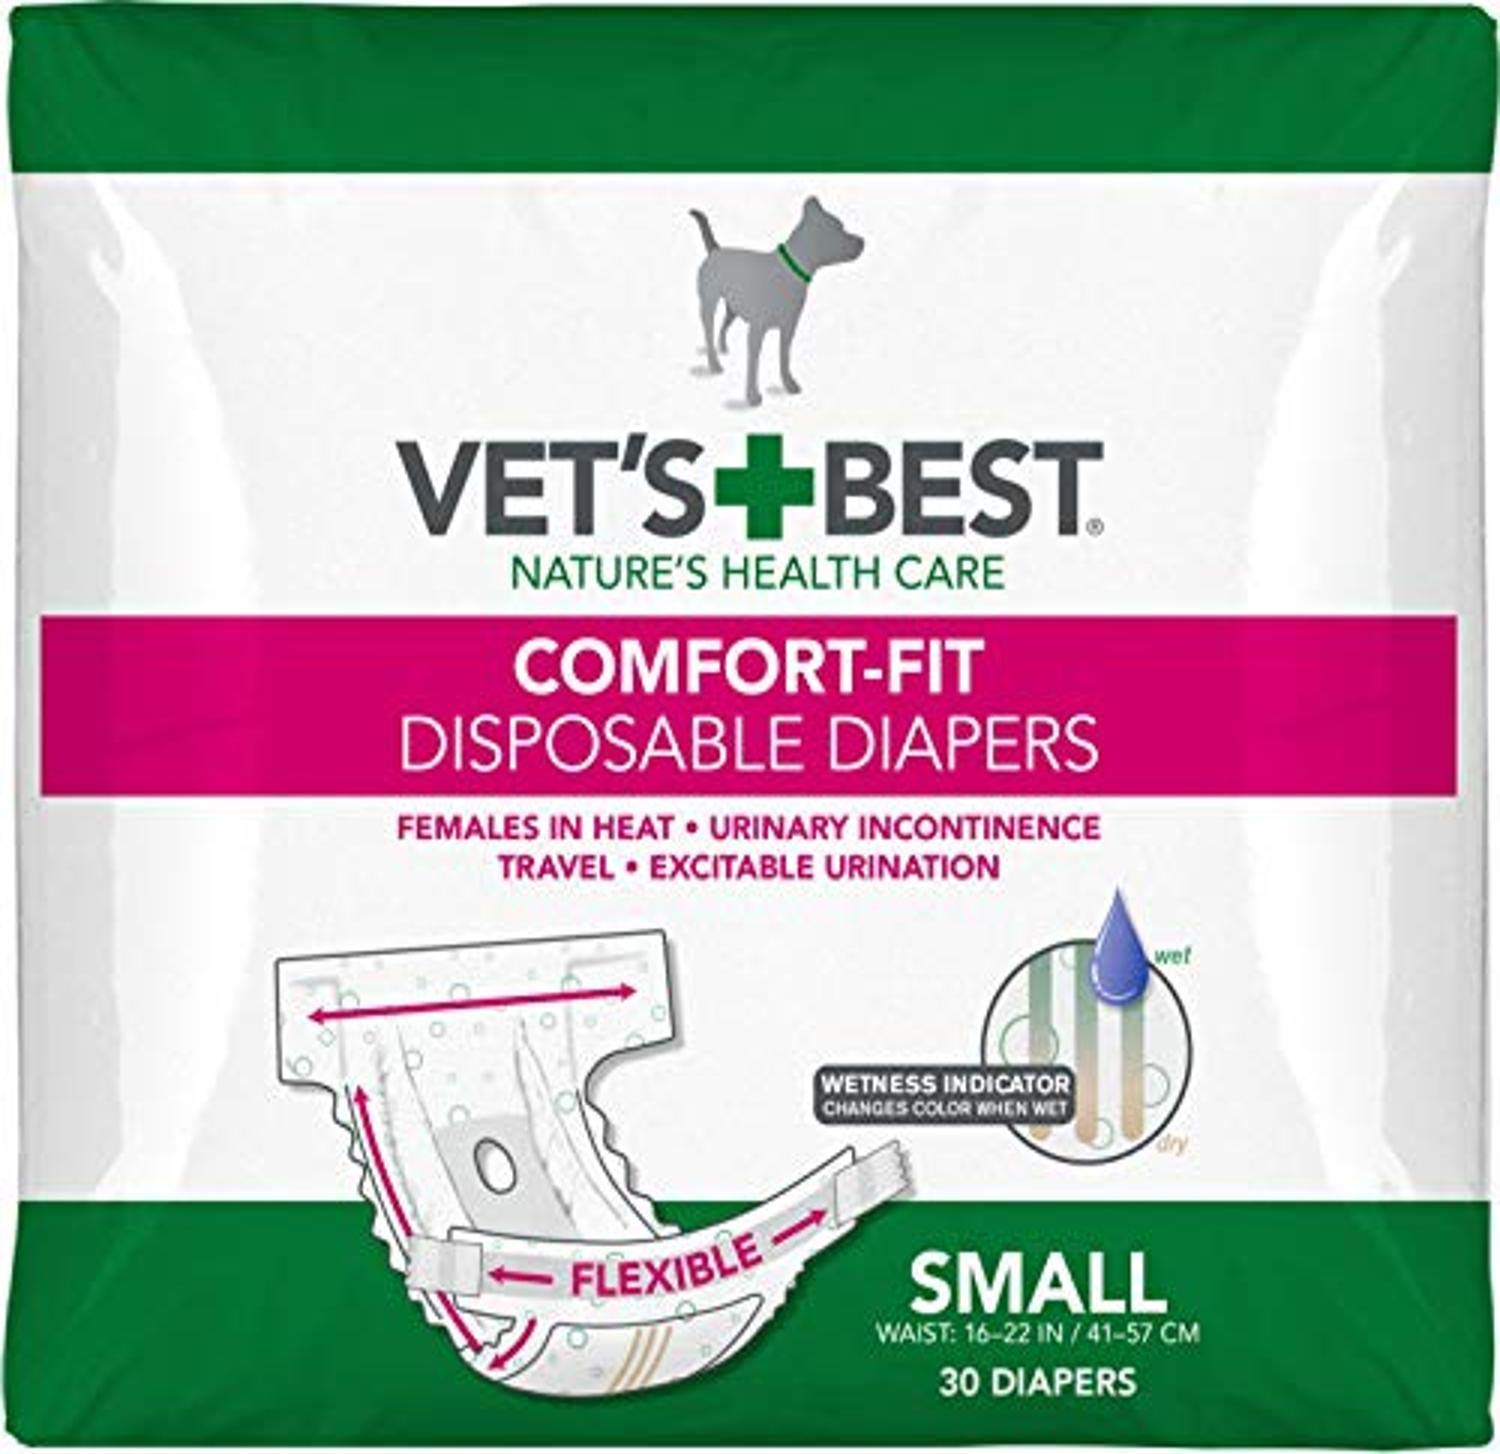 Vet's Best Comfort Fit Dog Diapers | Disposable Female Dog Diapers | Absorbent with Leak Proof Fit | Small, 30 Count